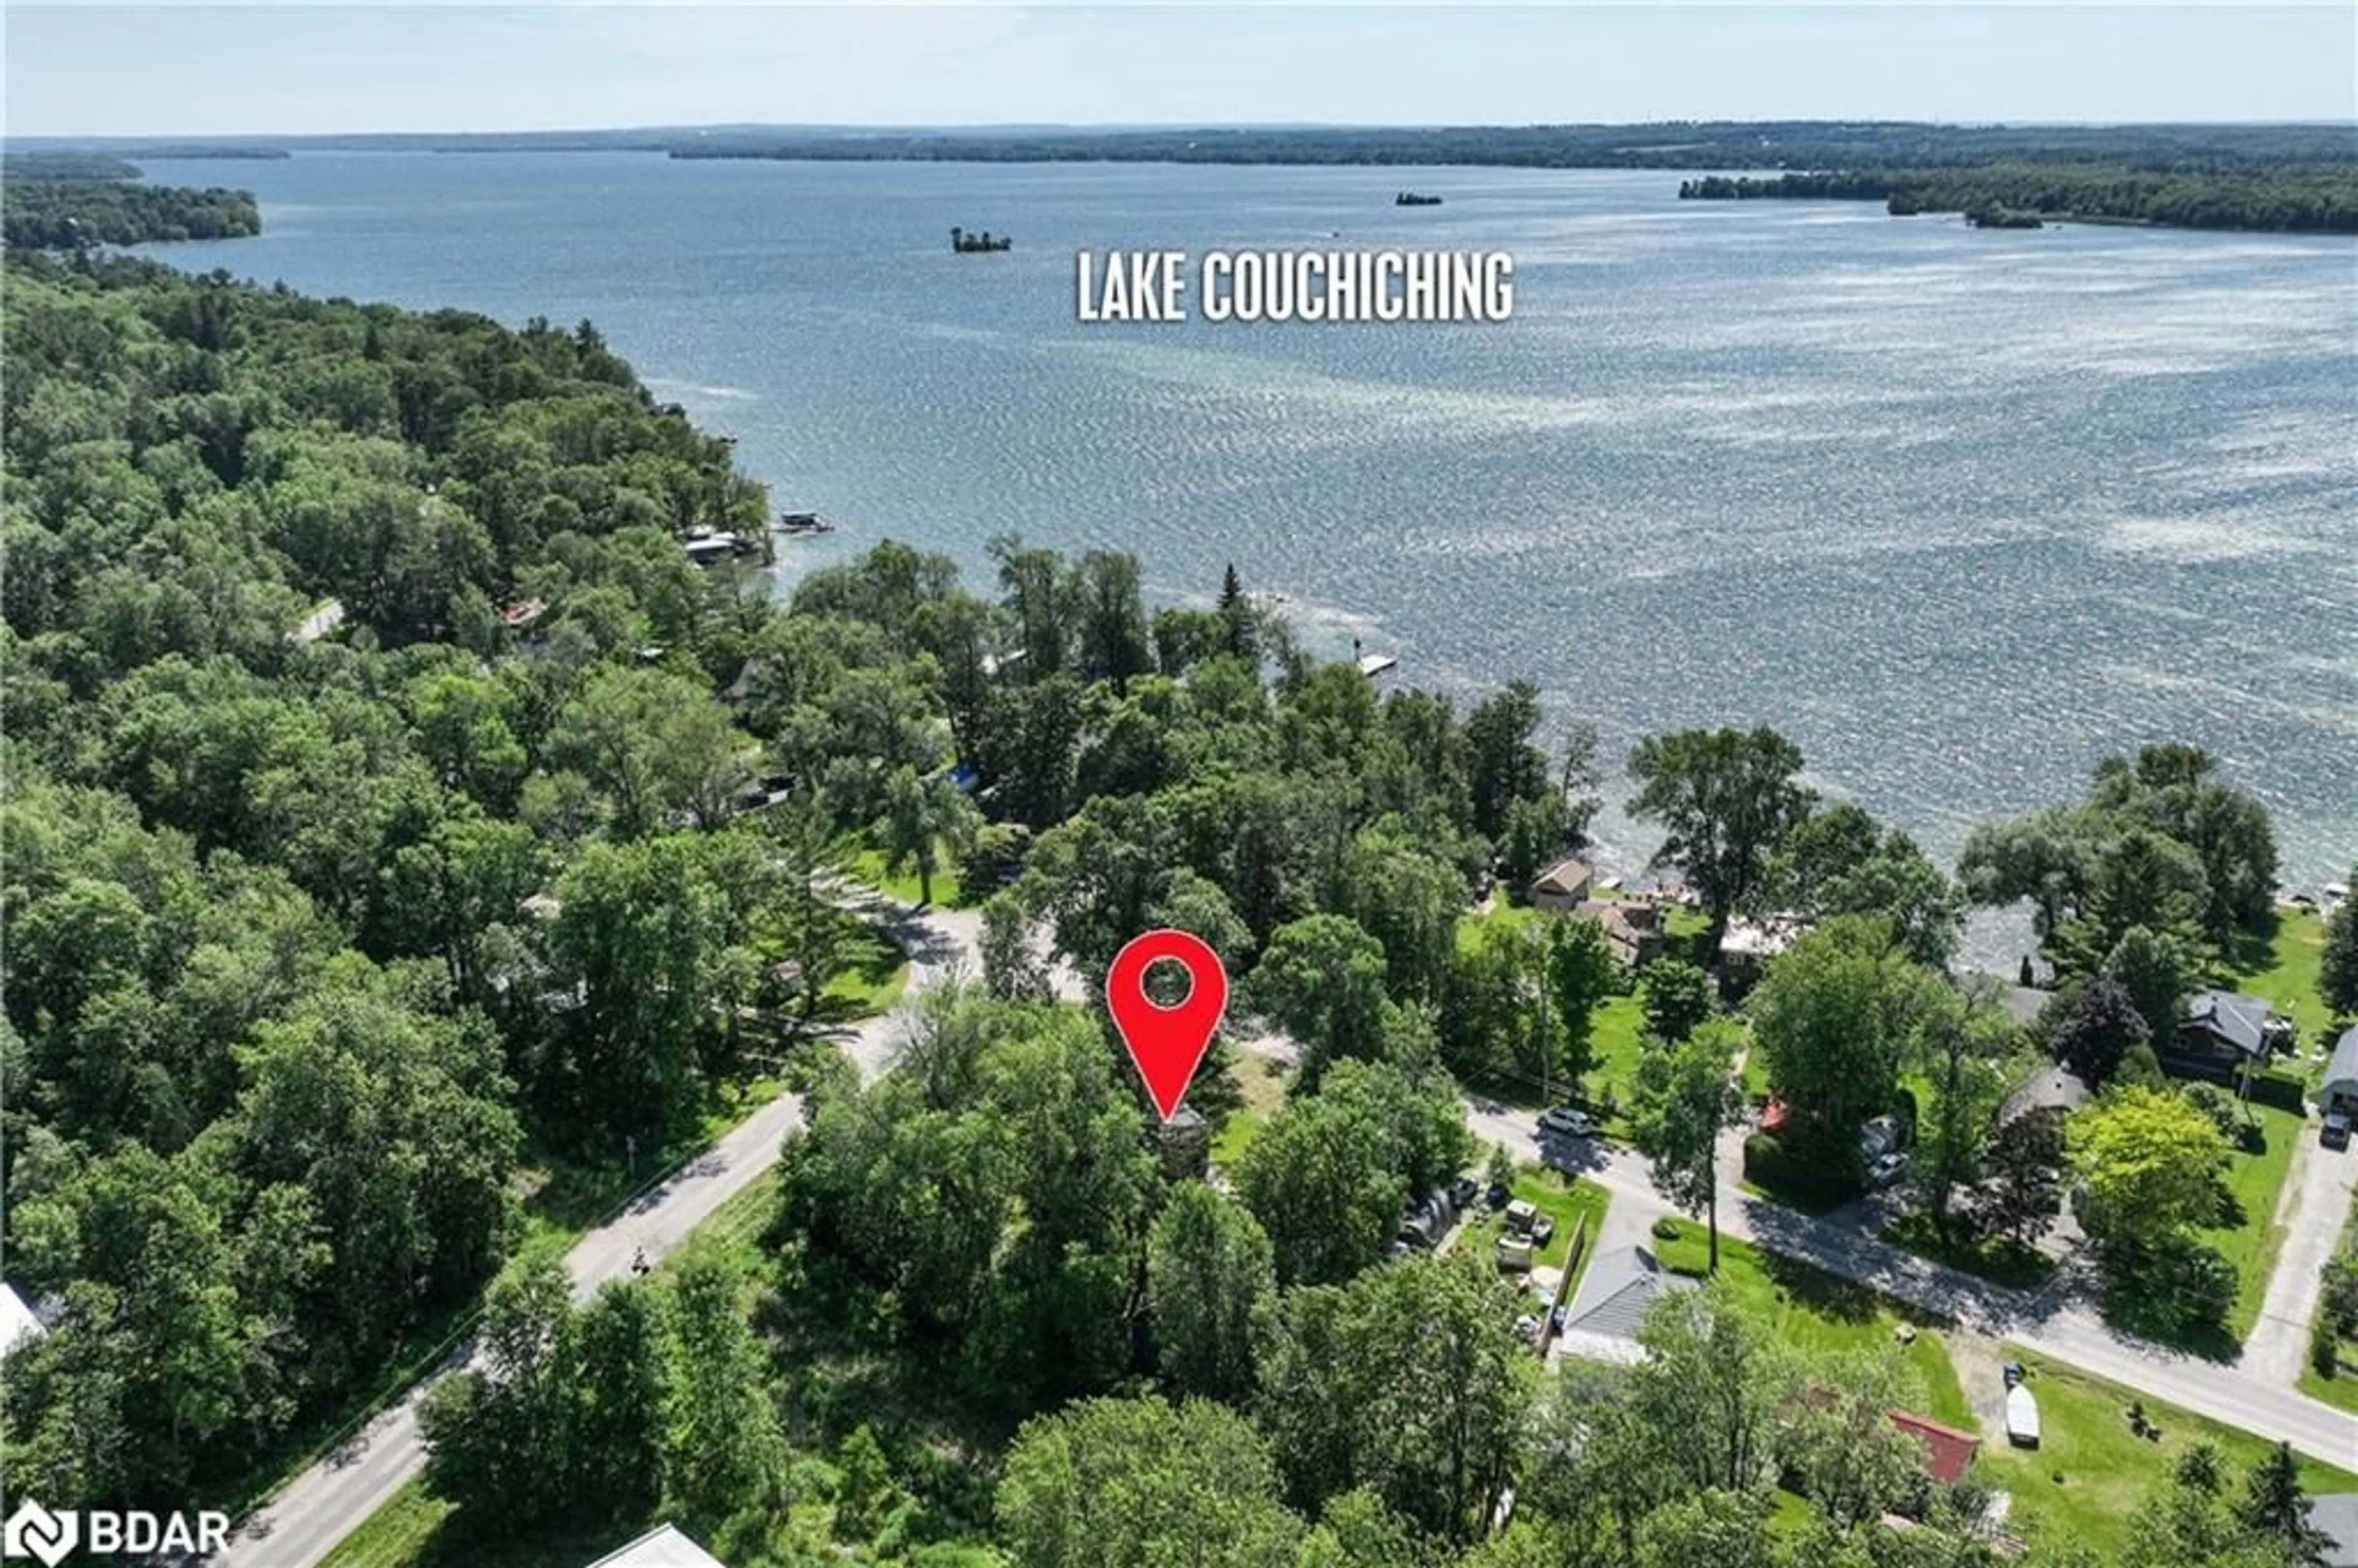 Lakeview for 7177 Beach Drive Dr, Washago Ontario L0K 2B0